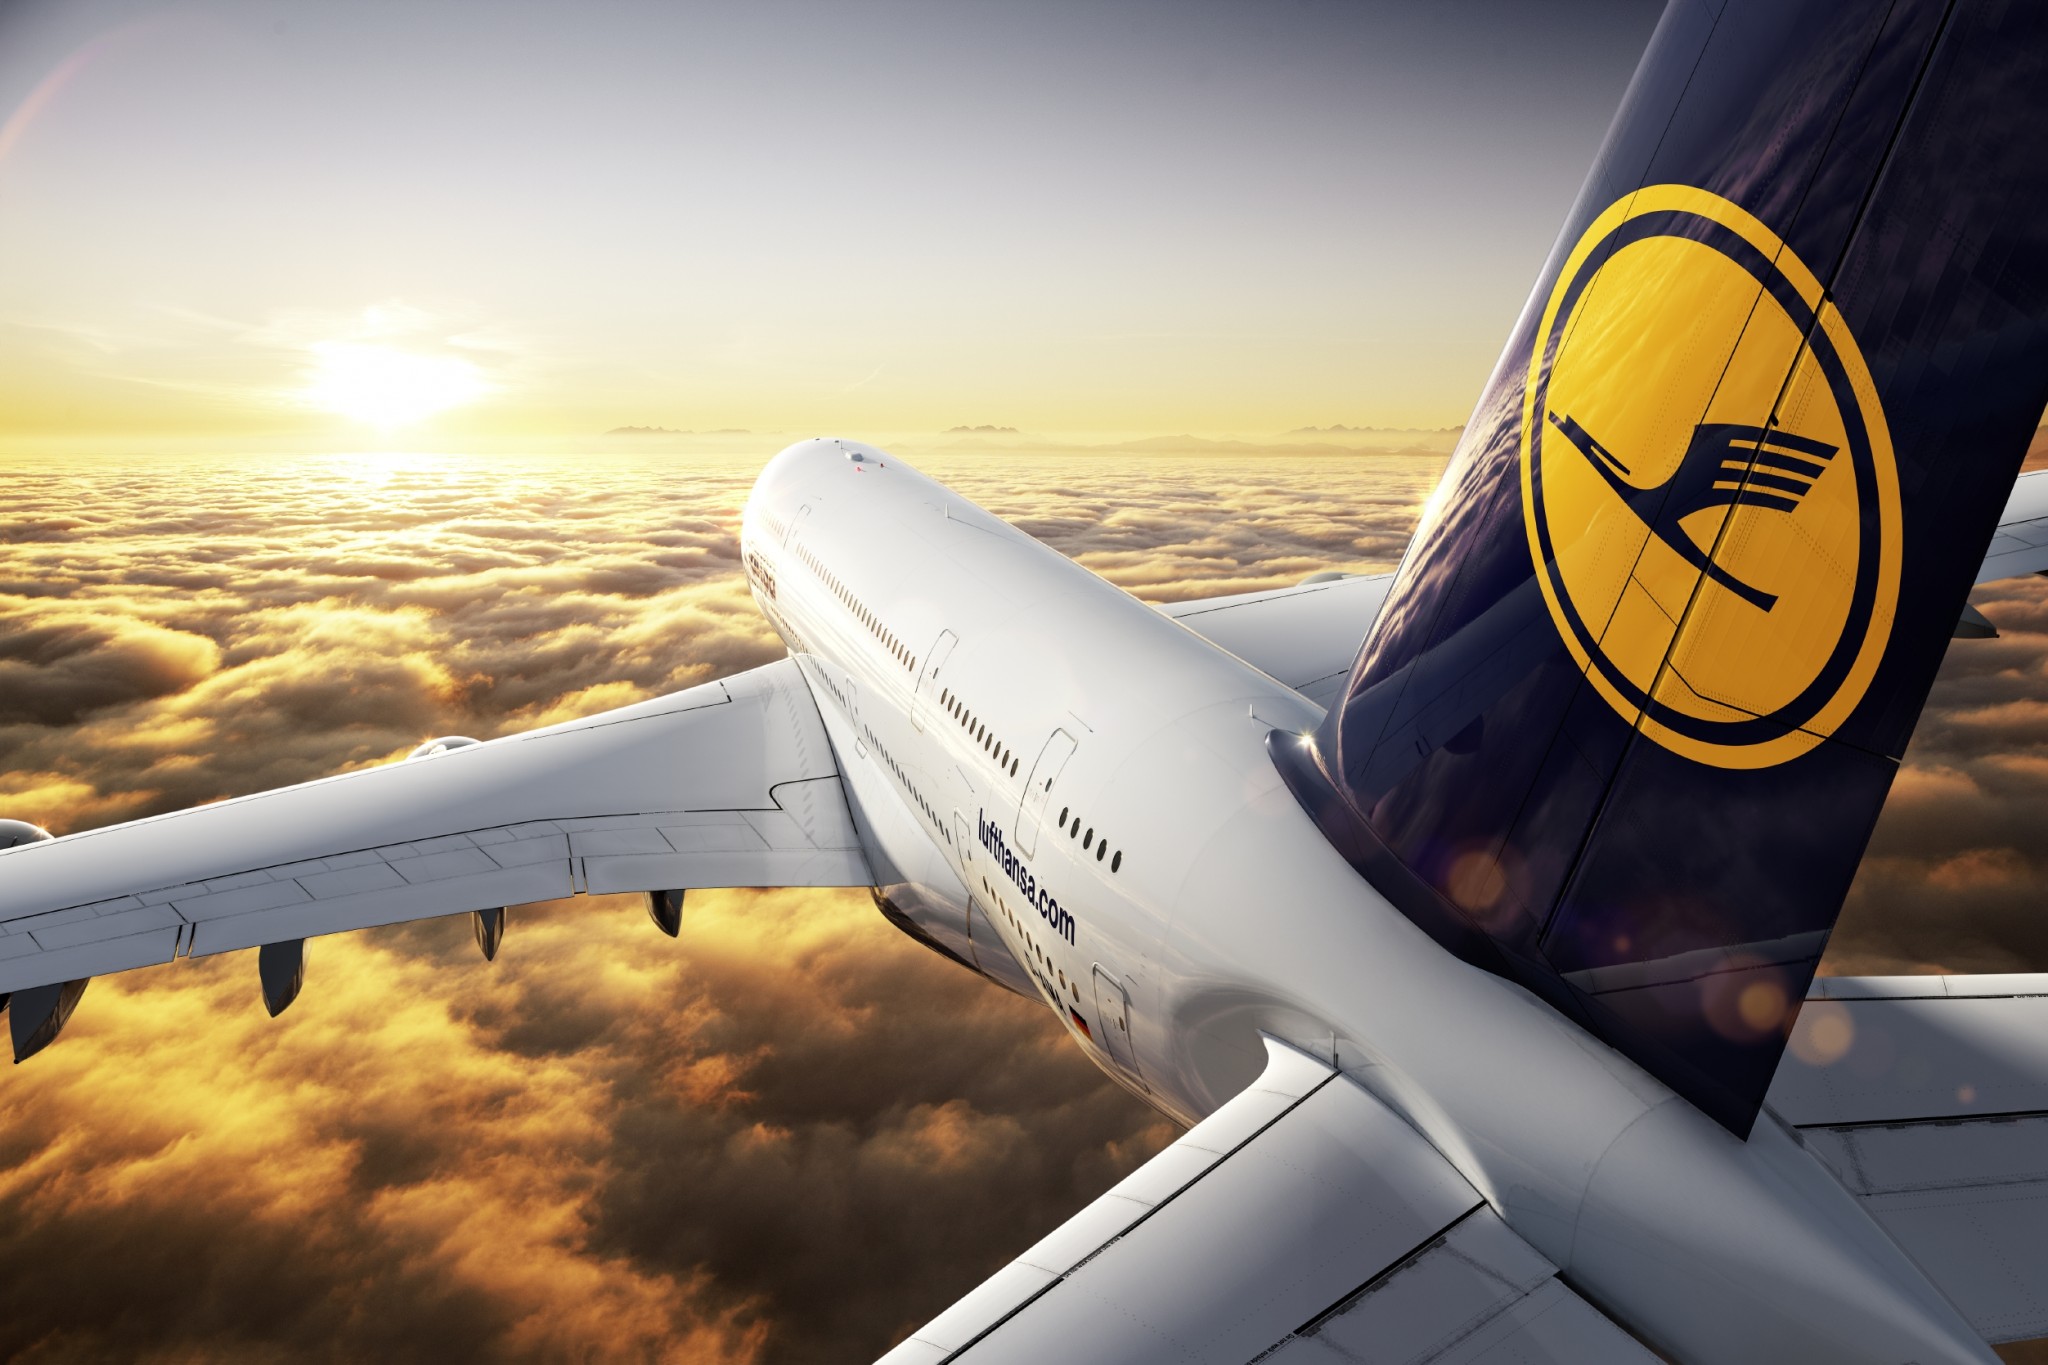 Lufthansa and flight attendants’ union zero down on new collective pay agreement